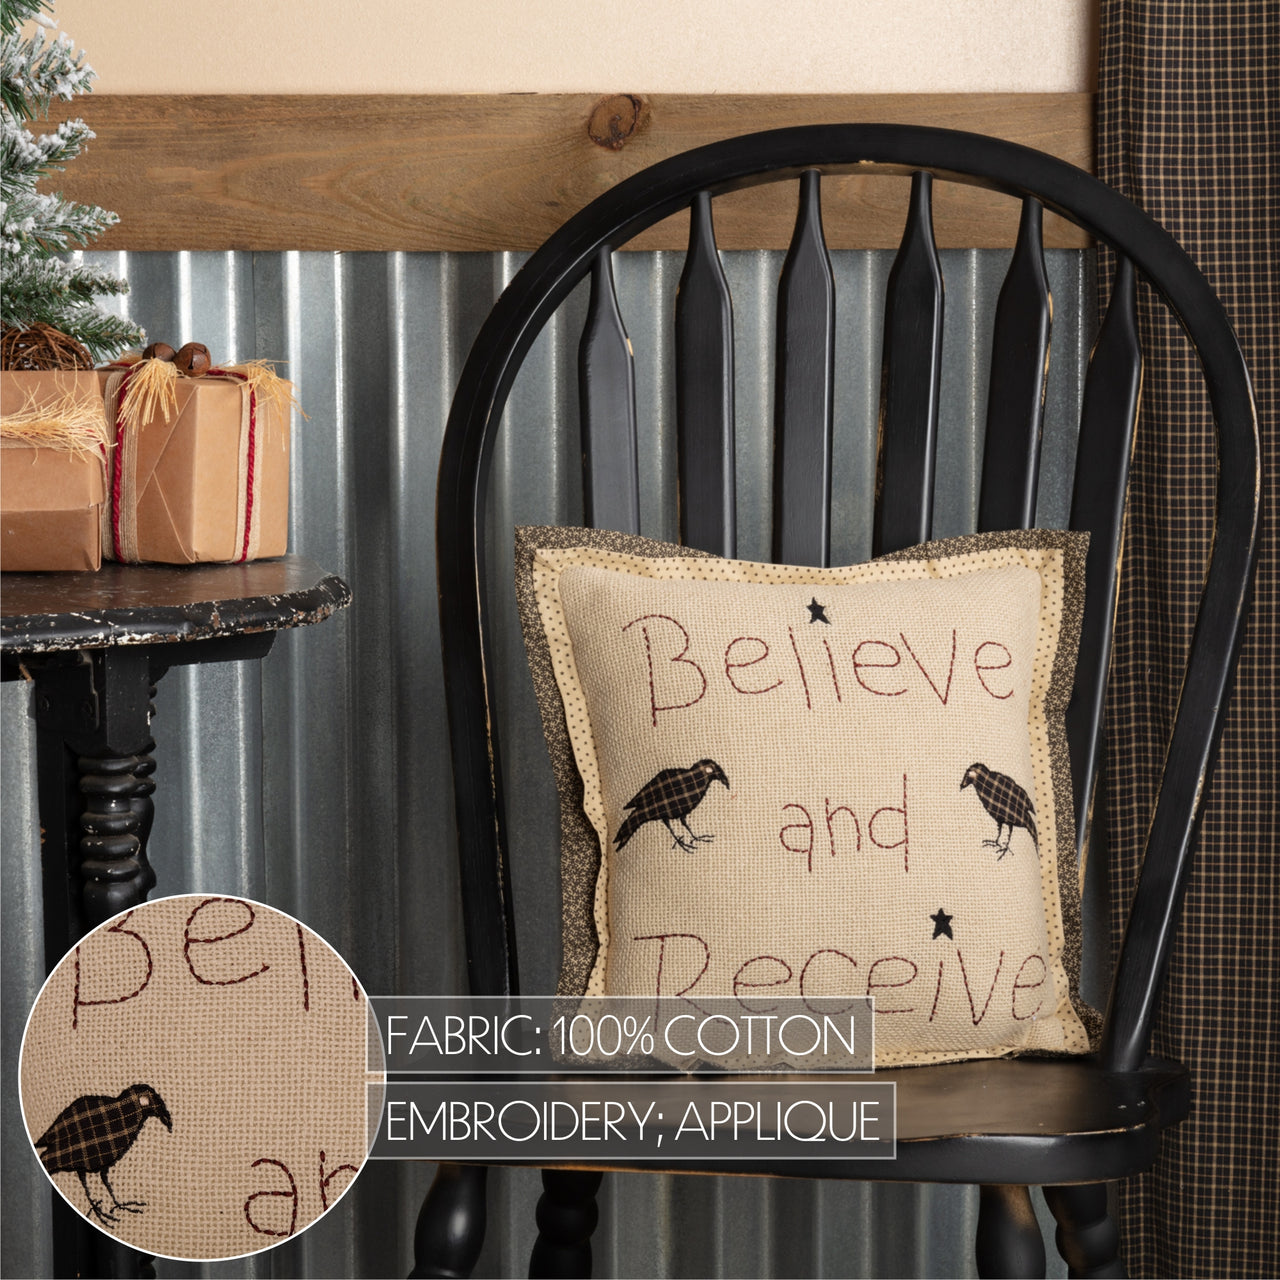 Kettle Grove Believe and Receive Pillow 12x12 VHC Brands